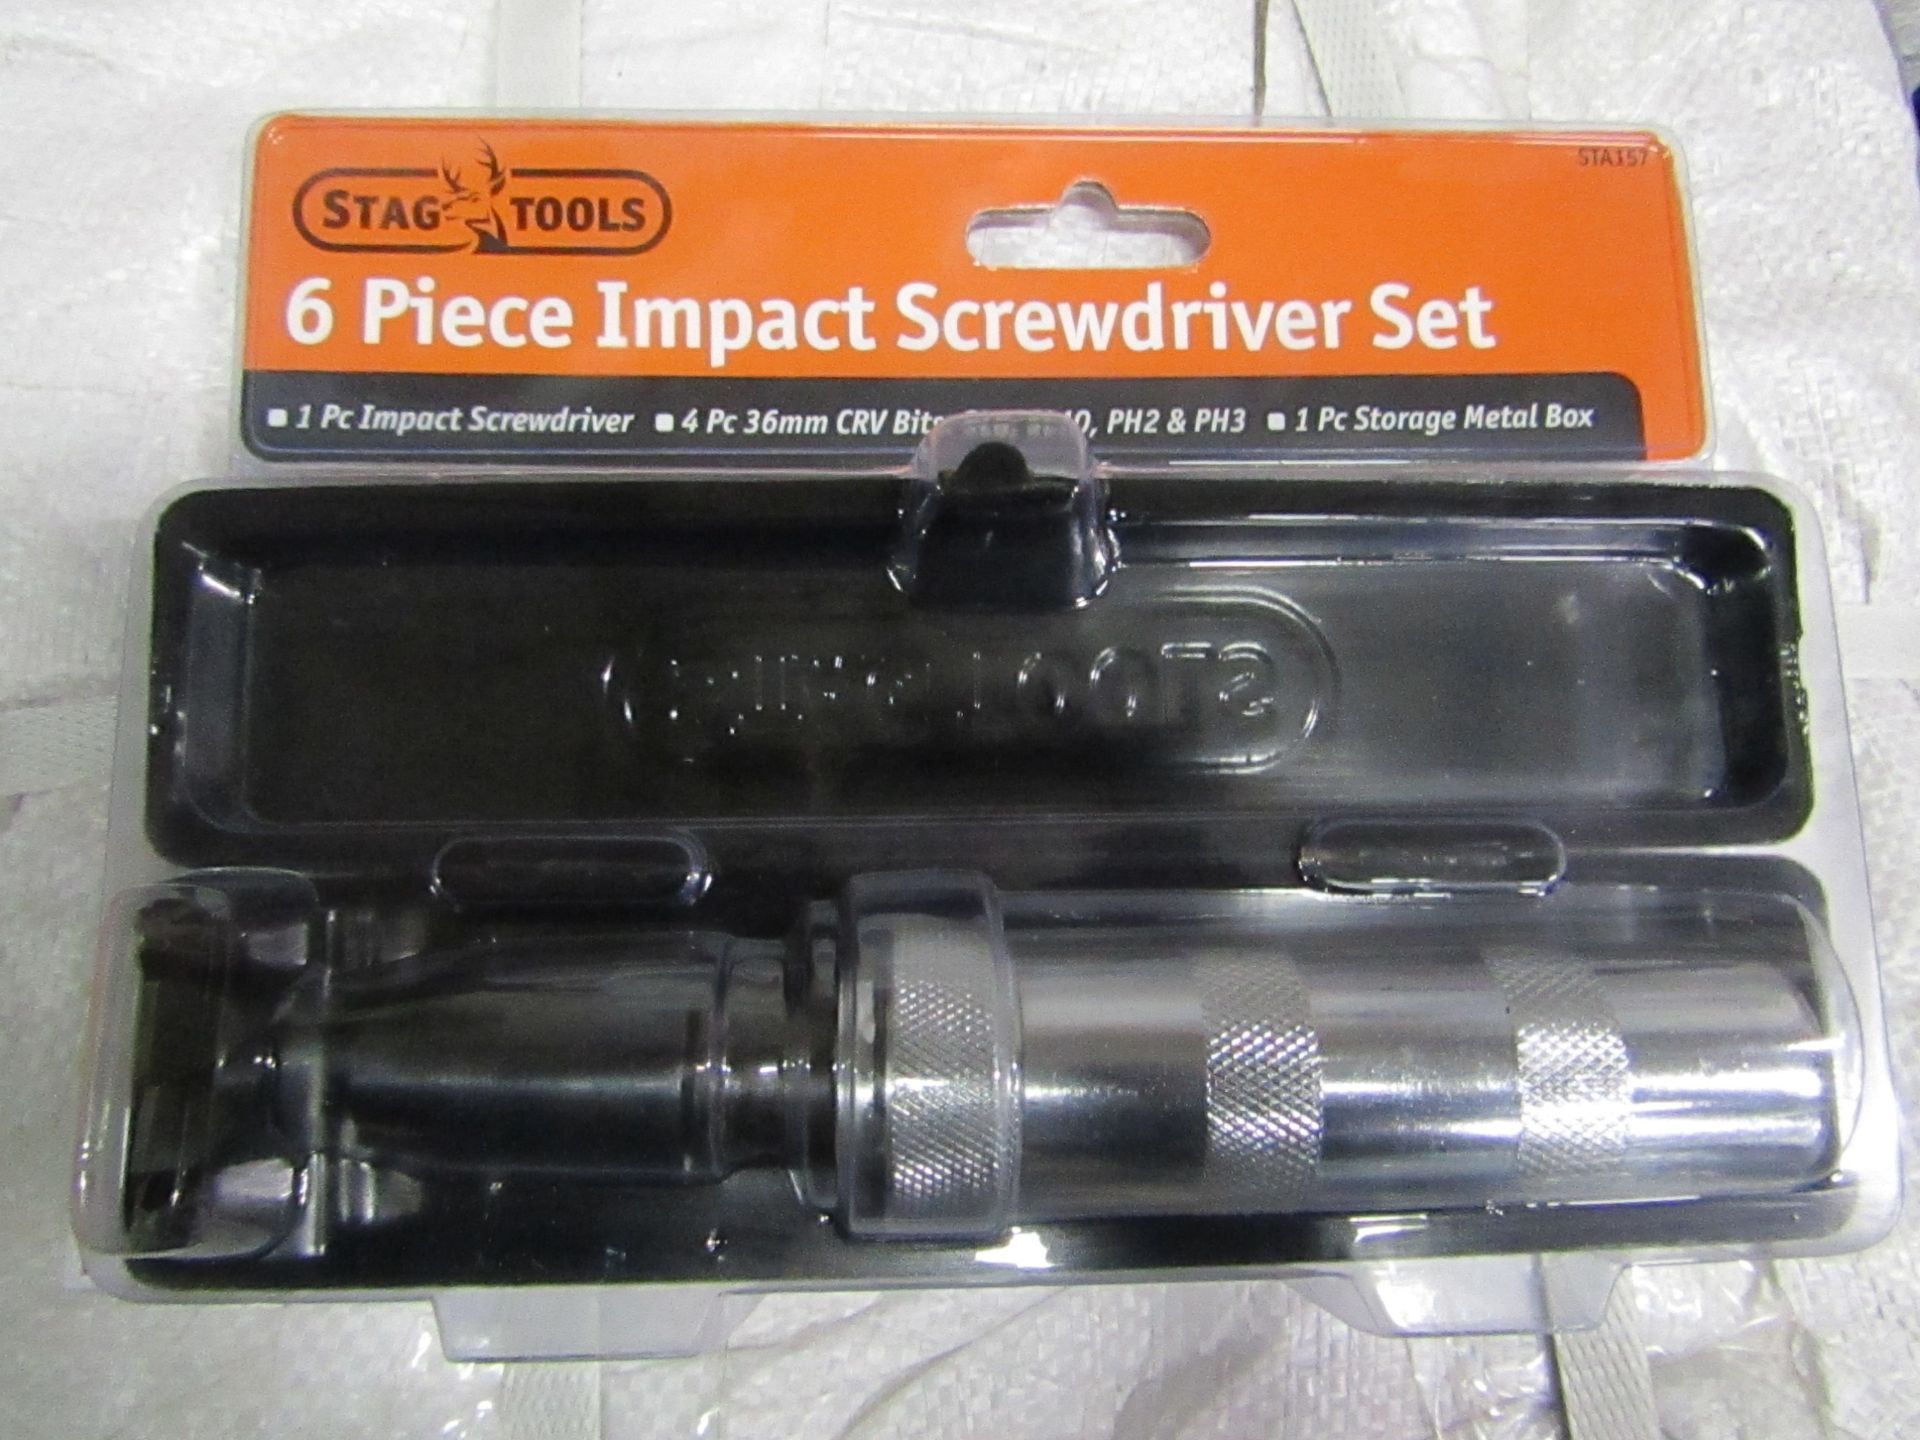 Stag Tools 6 piece Impact screwdriver, new and blister packed